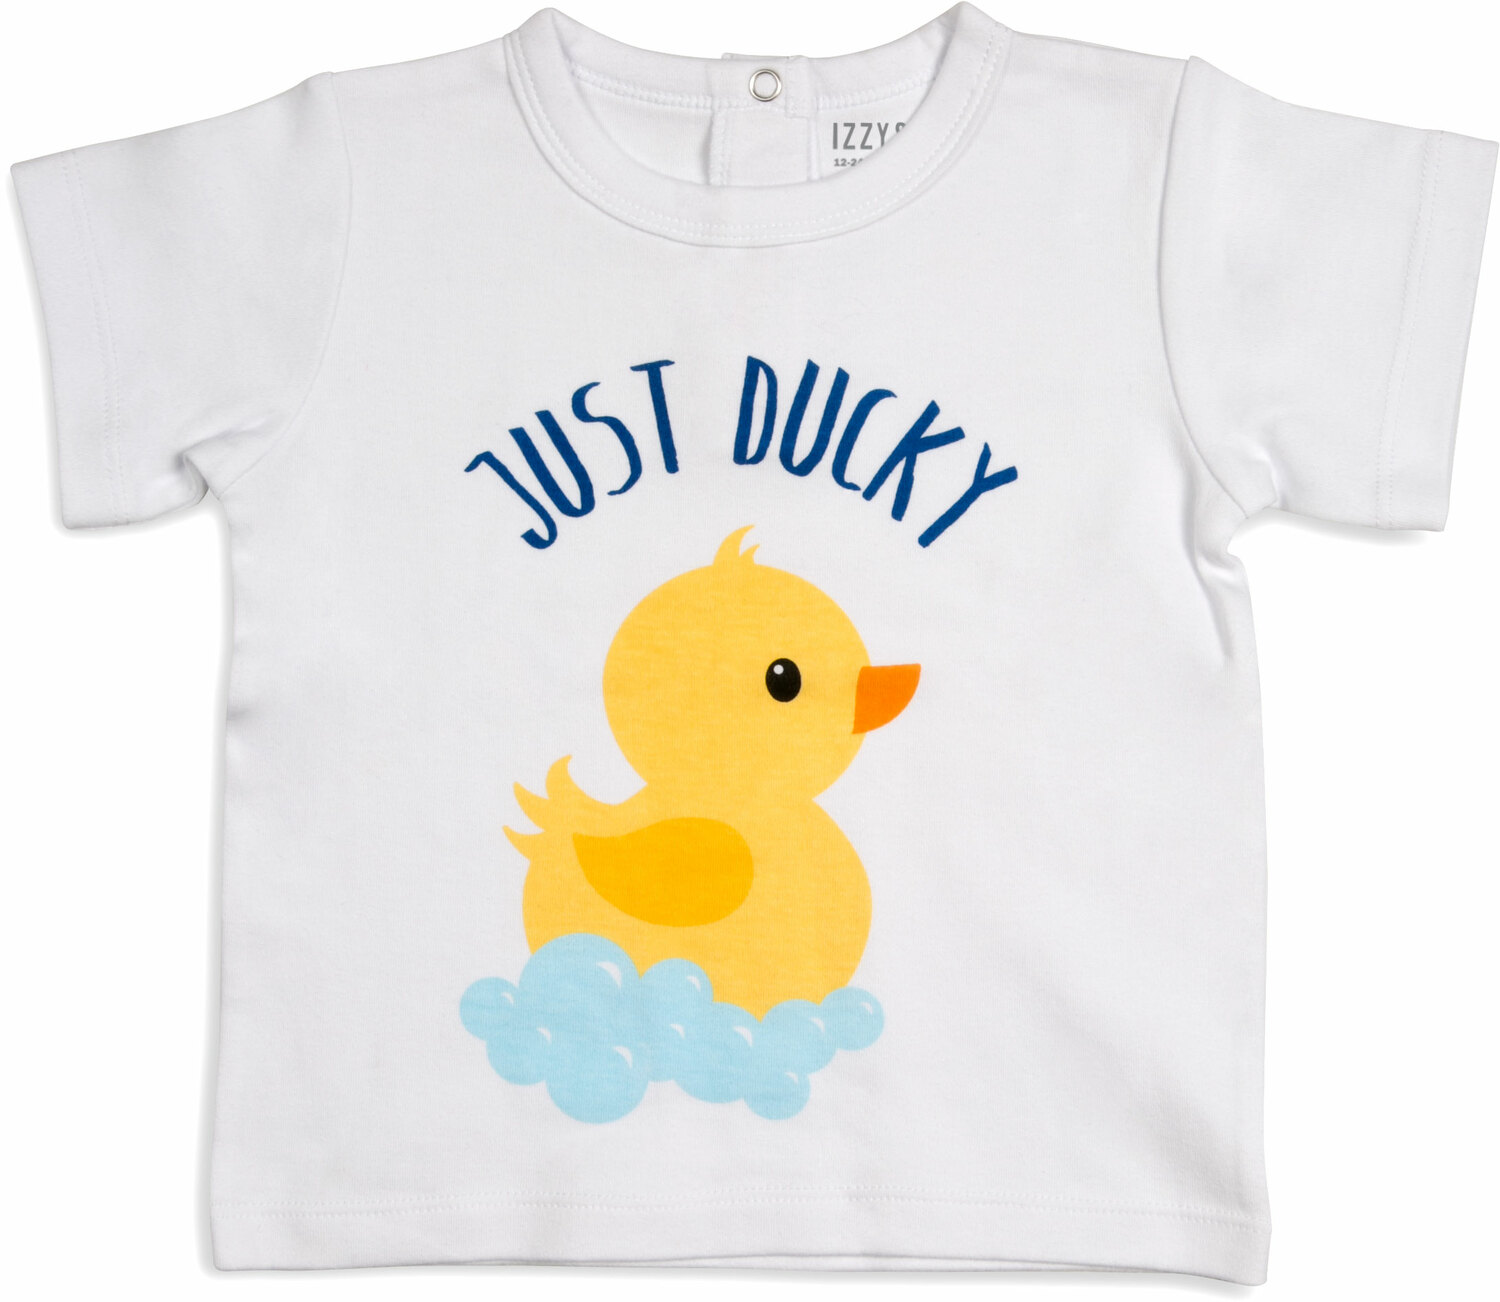 Rubber Ducky by Izzy & Owie - Rubber Ducky - 12-24 Months White T-Shirt